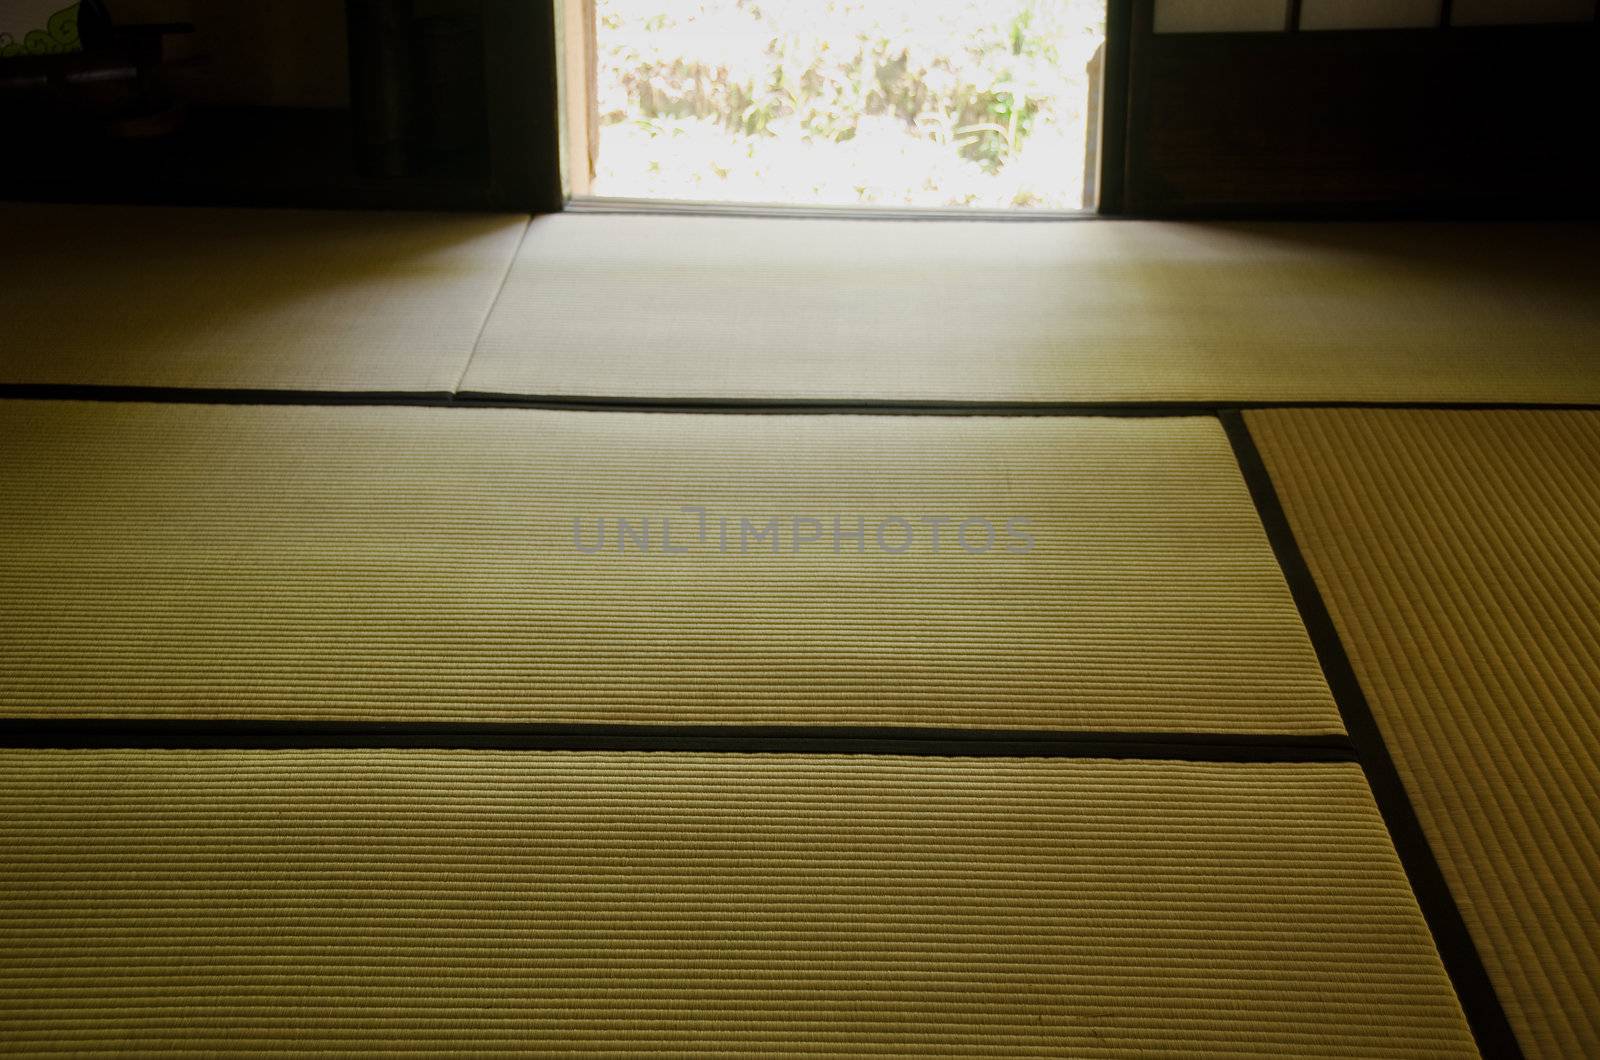 Tatami mats in the tatami room of a japanese house